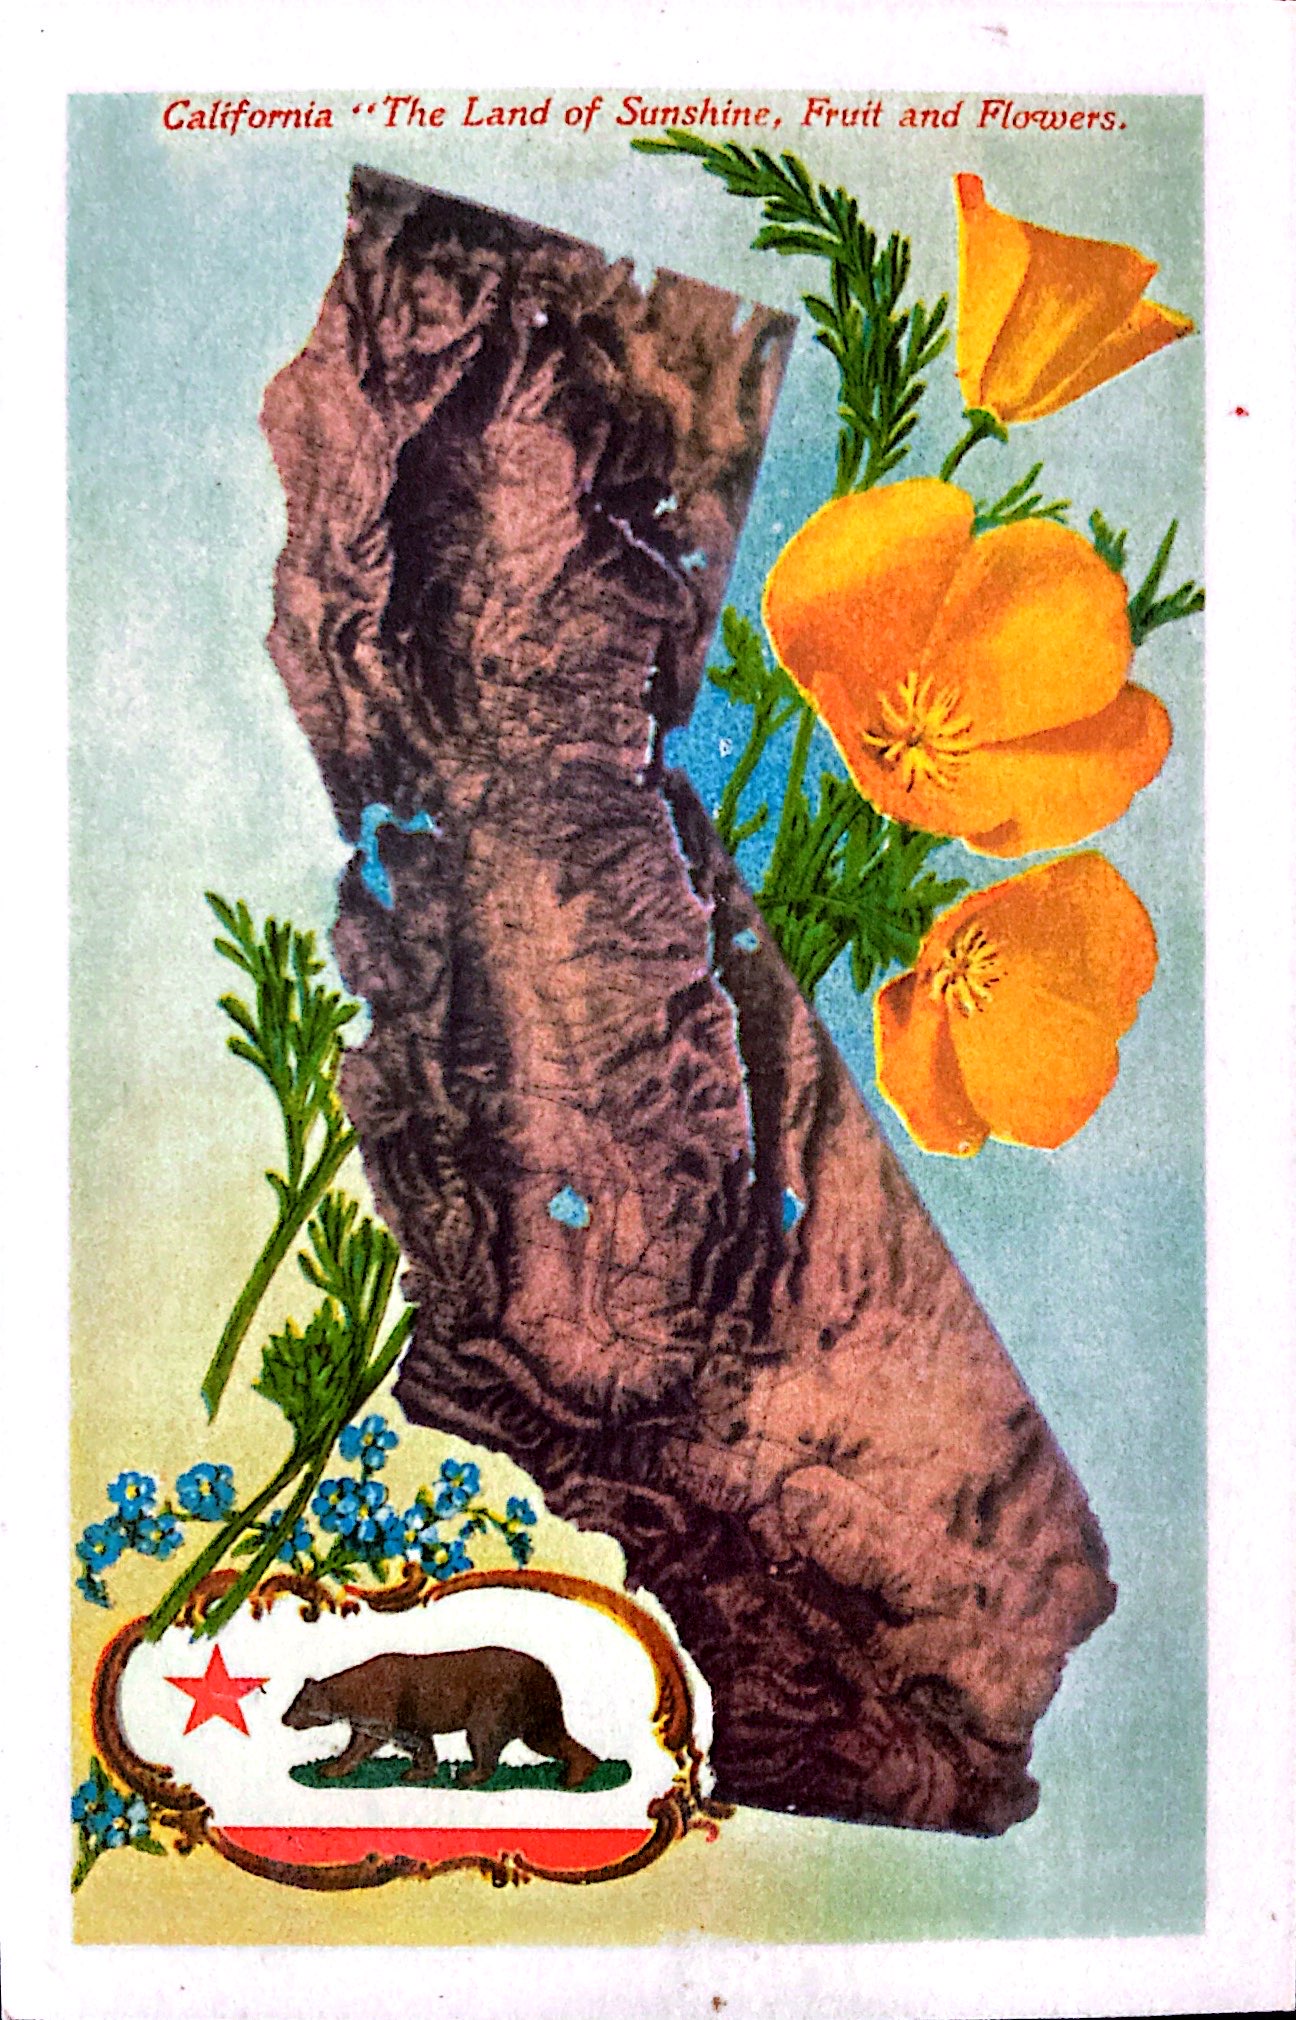 an illustration of california  "The land of Sunshine, fruits, and flowers"